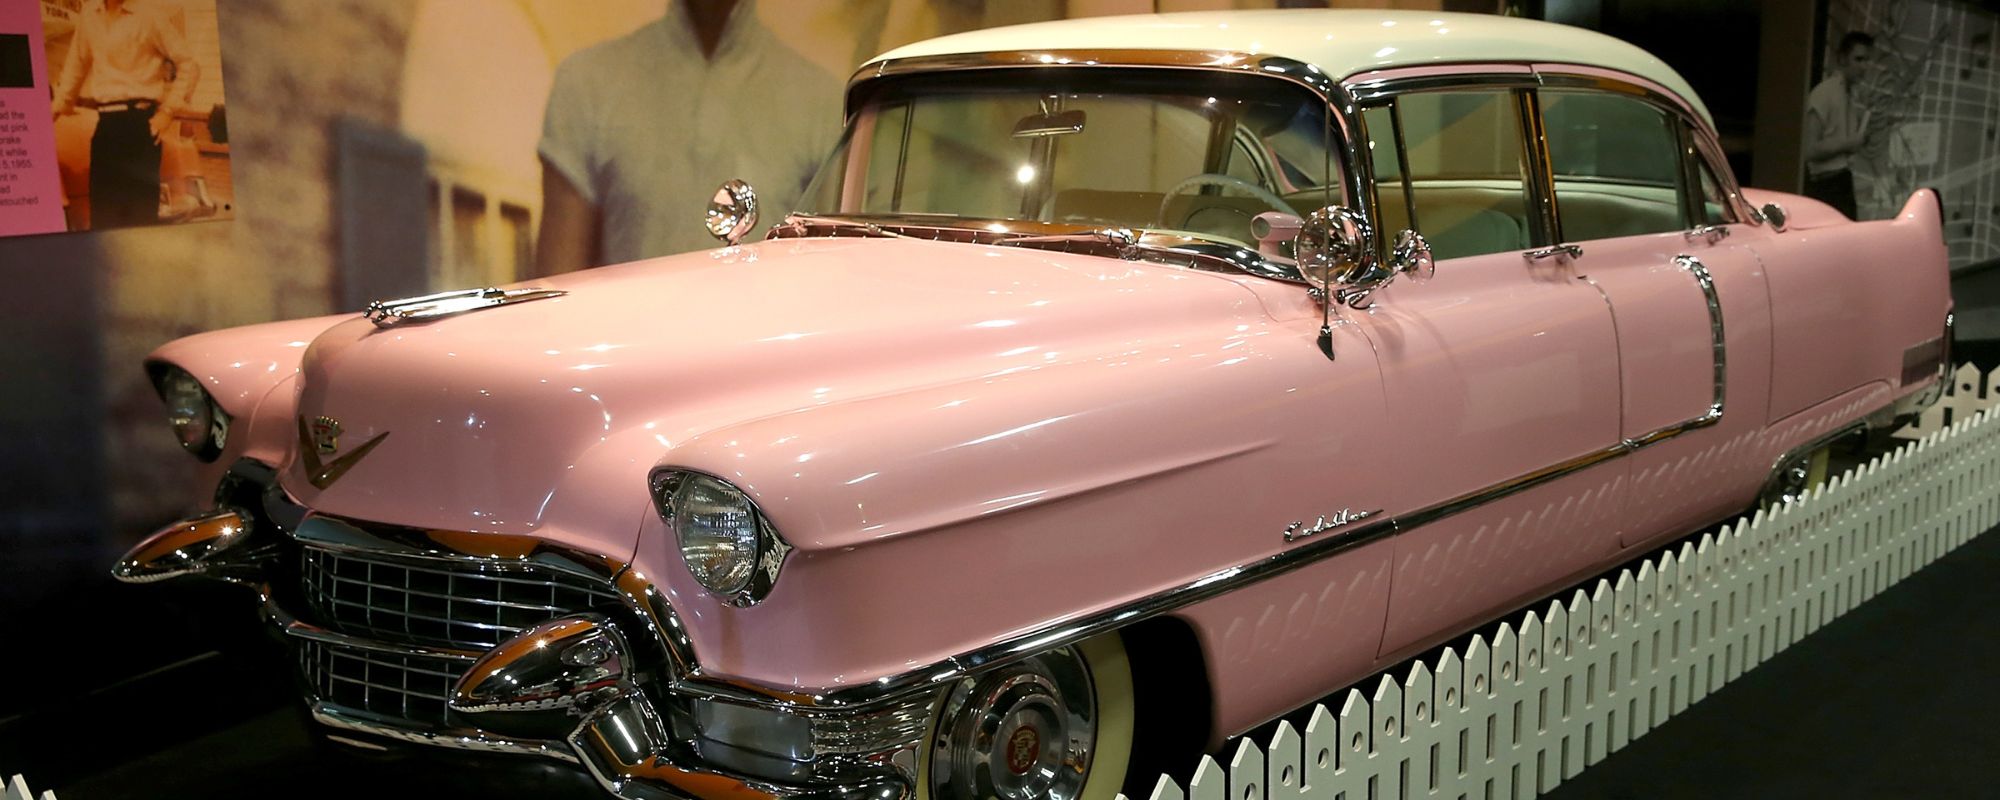 Elvis Presley Gifted Cadillacs to Everyone From His Mother to Bank Tellers